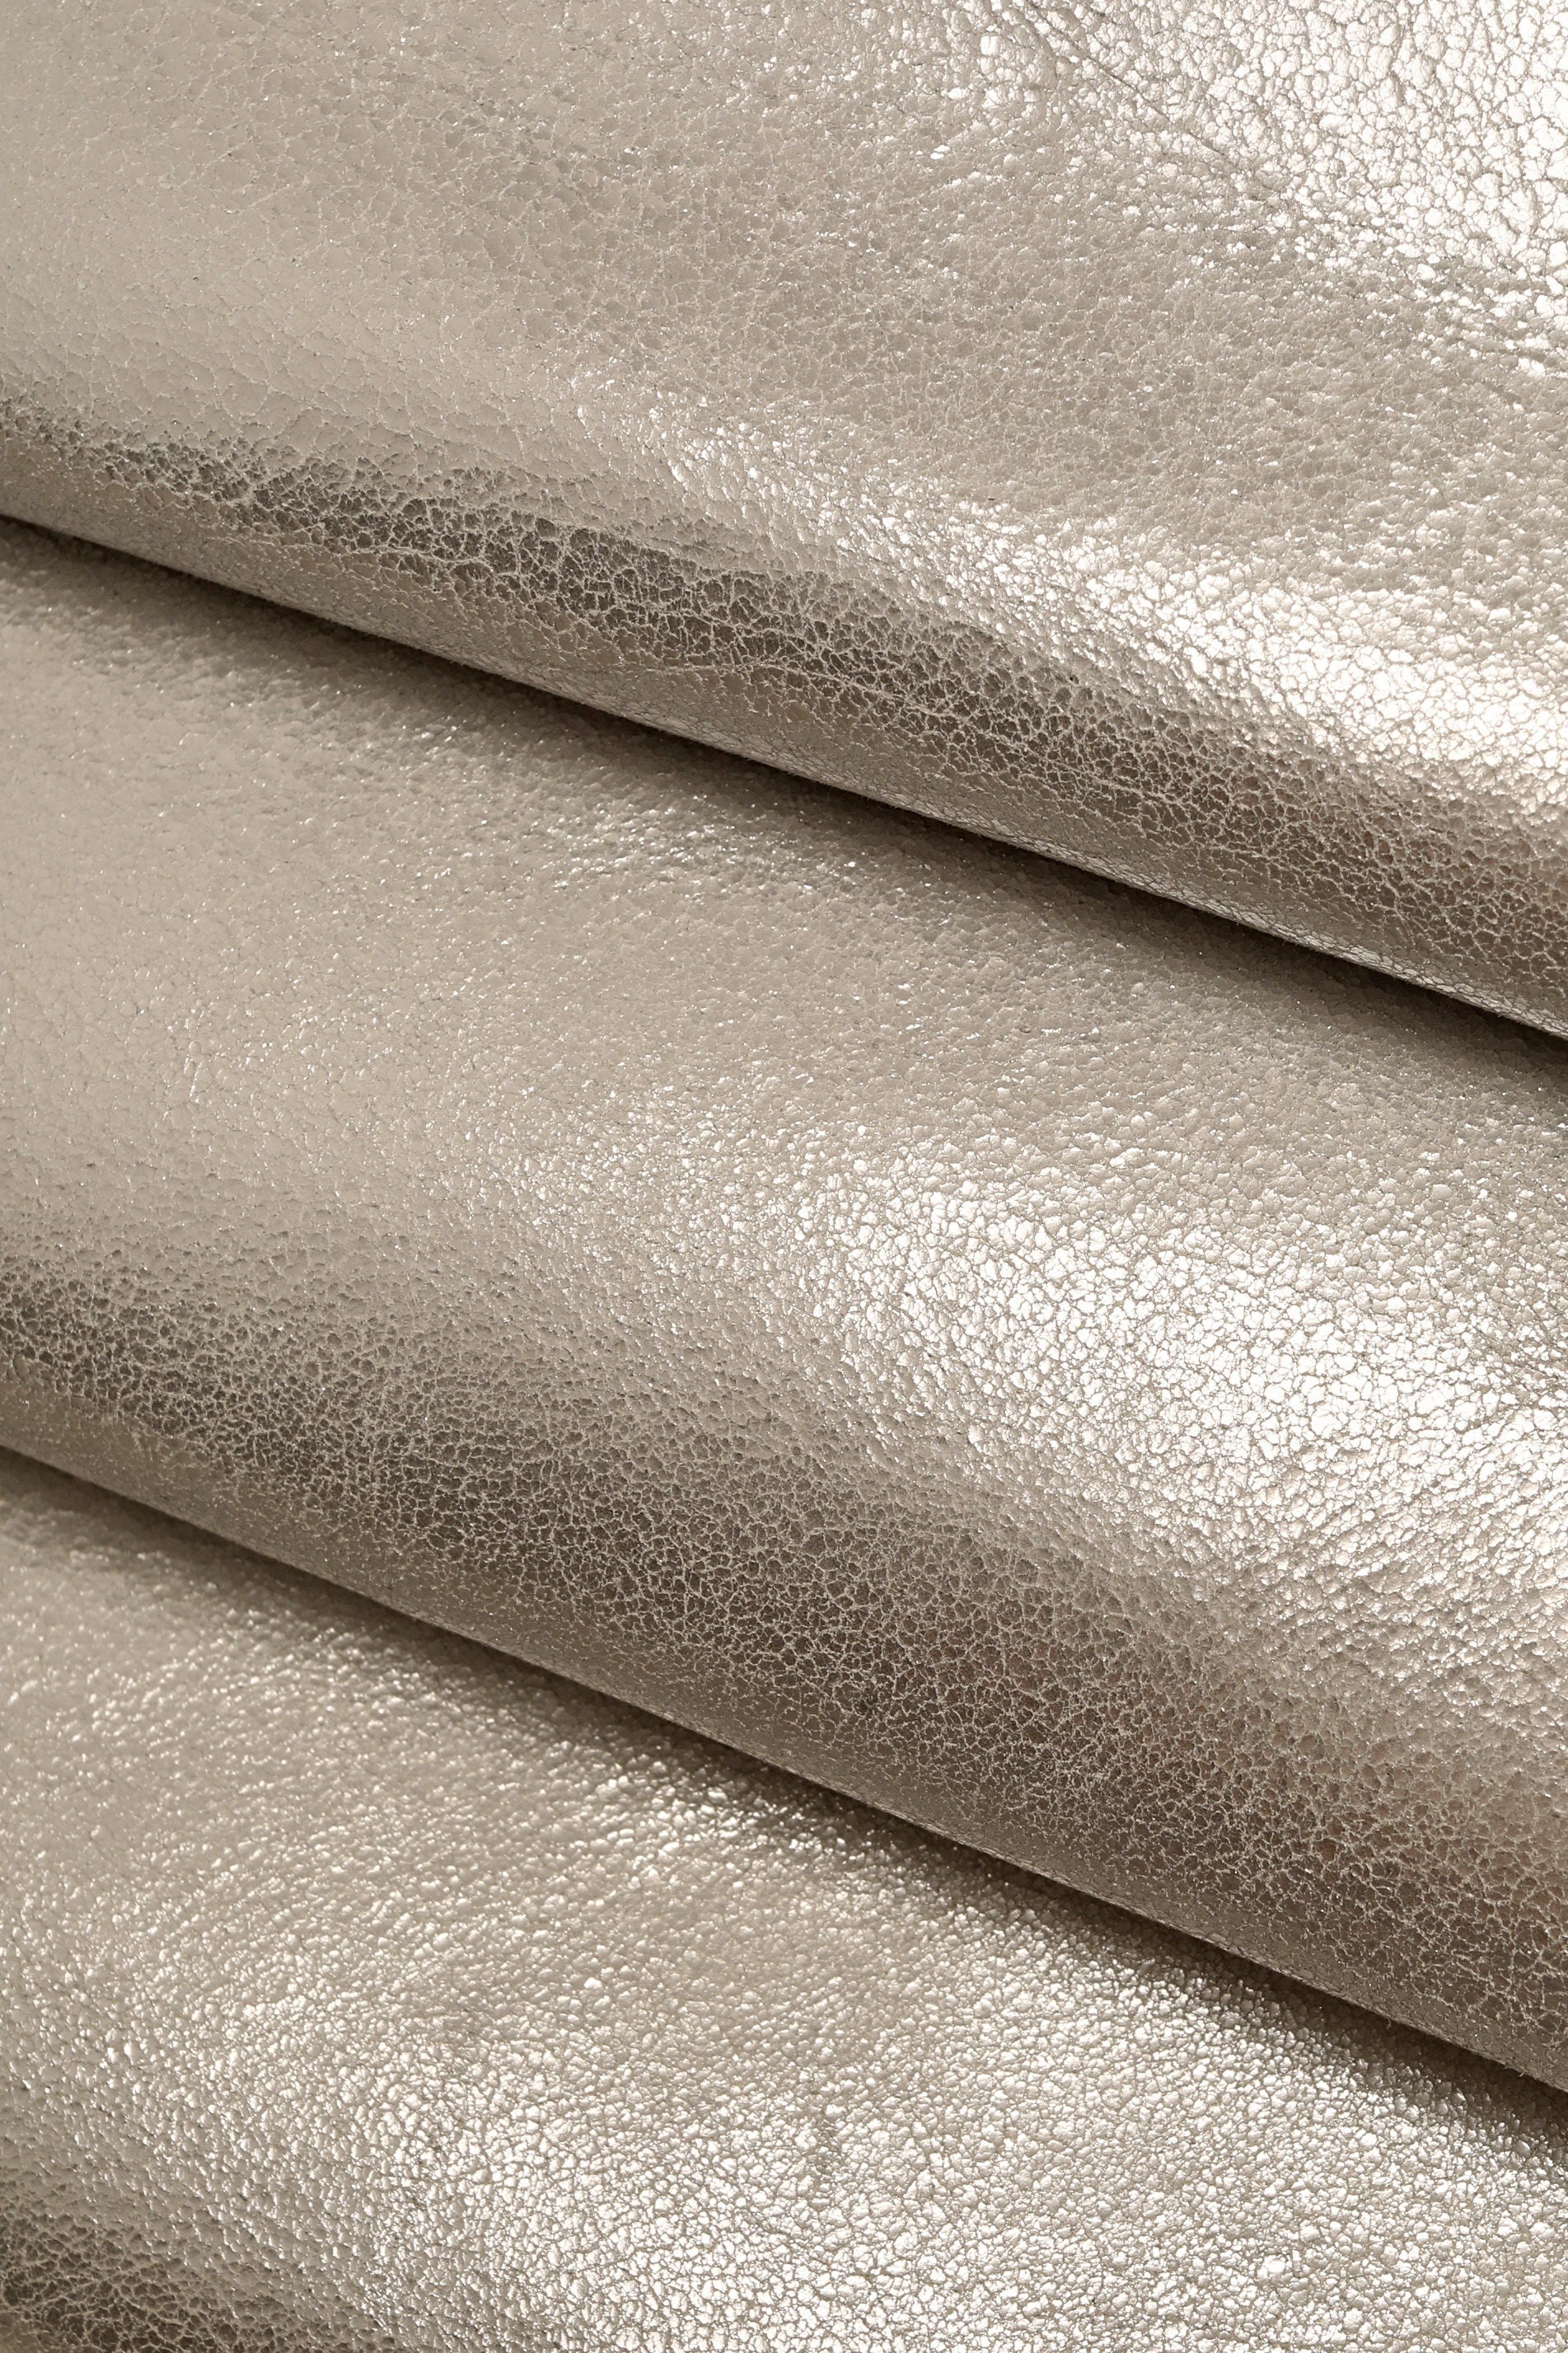 Real Lambskin Leather - Silver Crackled Effect